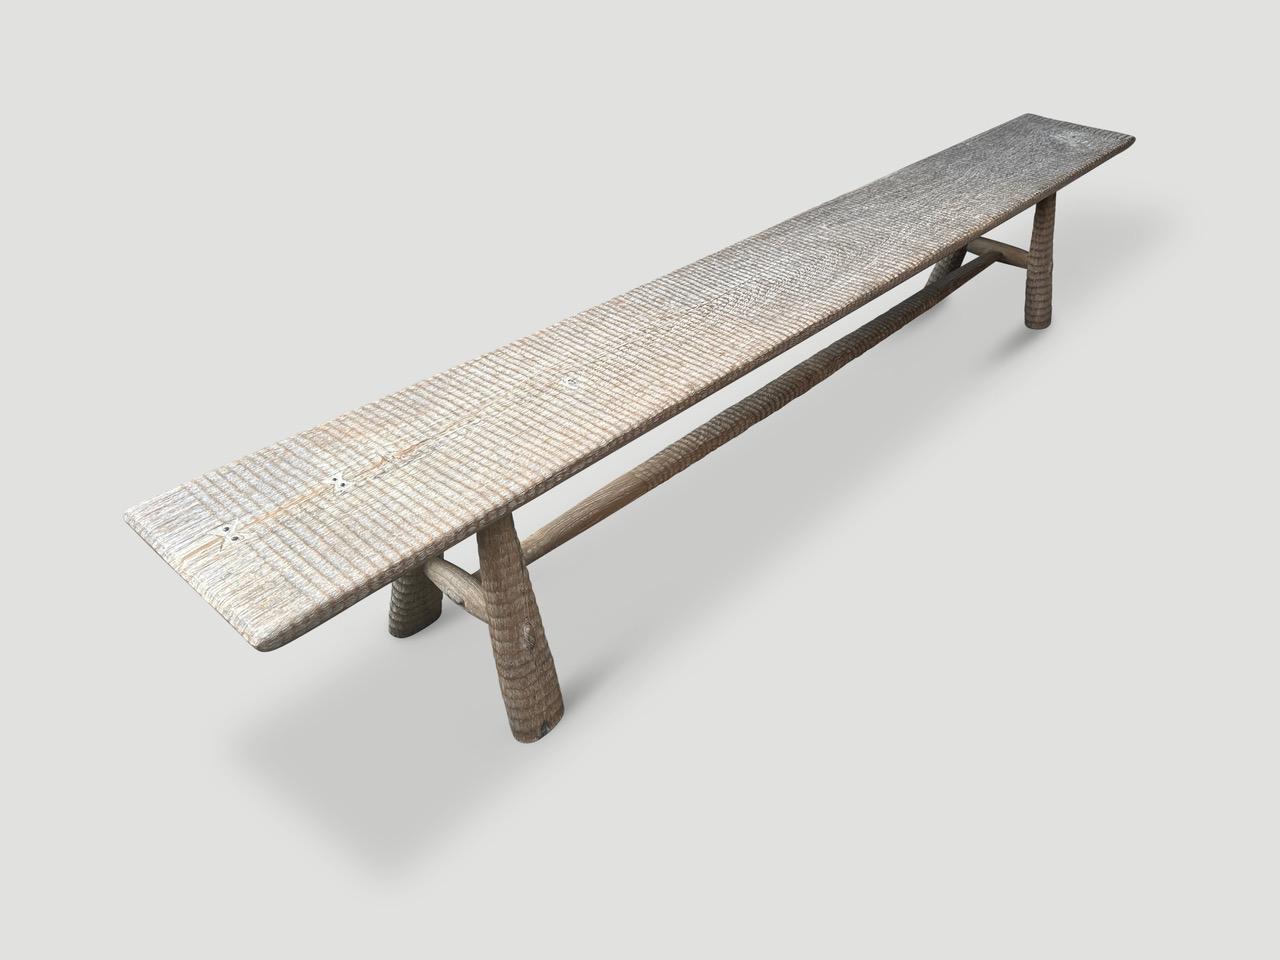 Andrianna Shamaris Impressive Minimalist Hand Carved Teak Wood Bench  In Excellent Condition For Sale In New York, NY